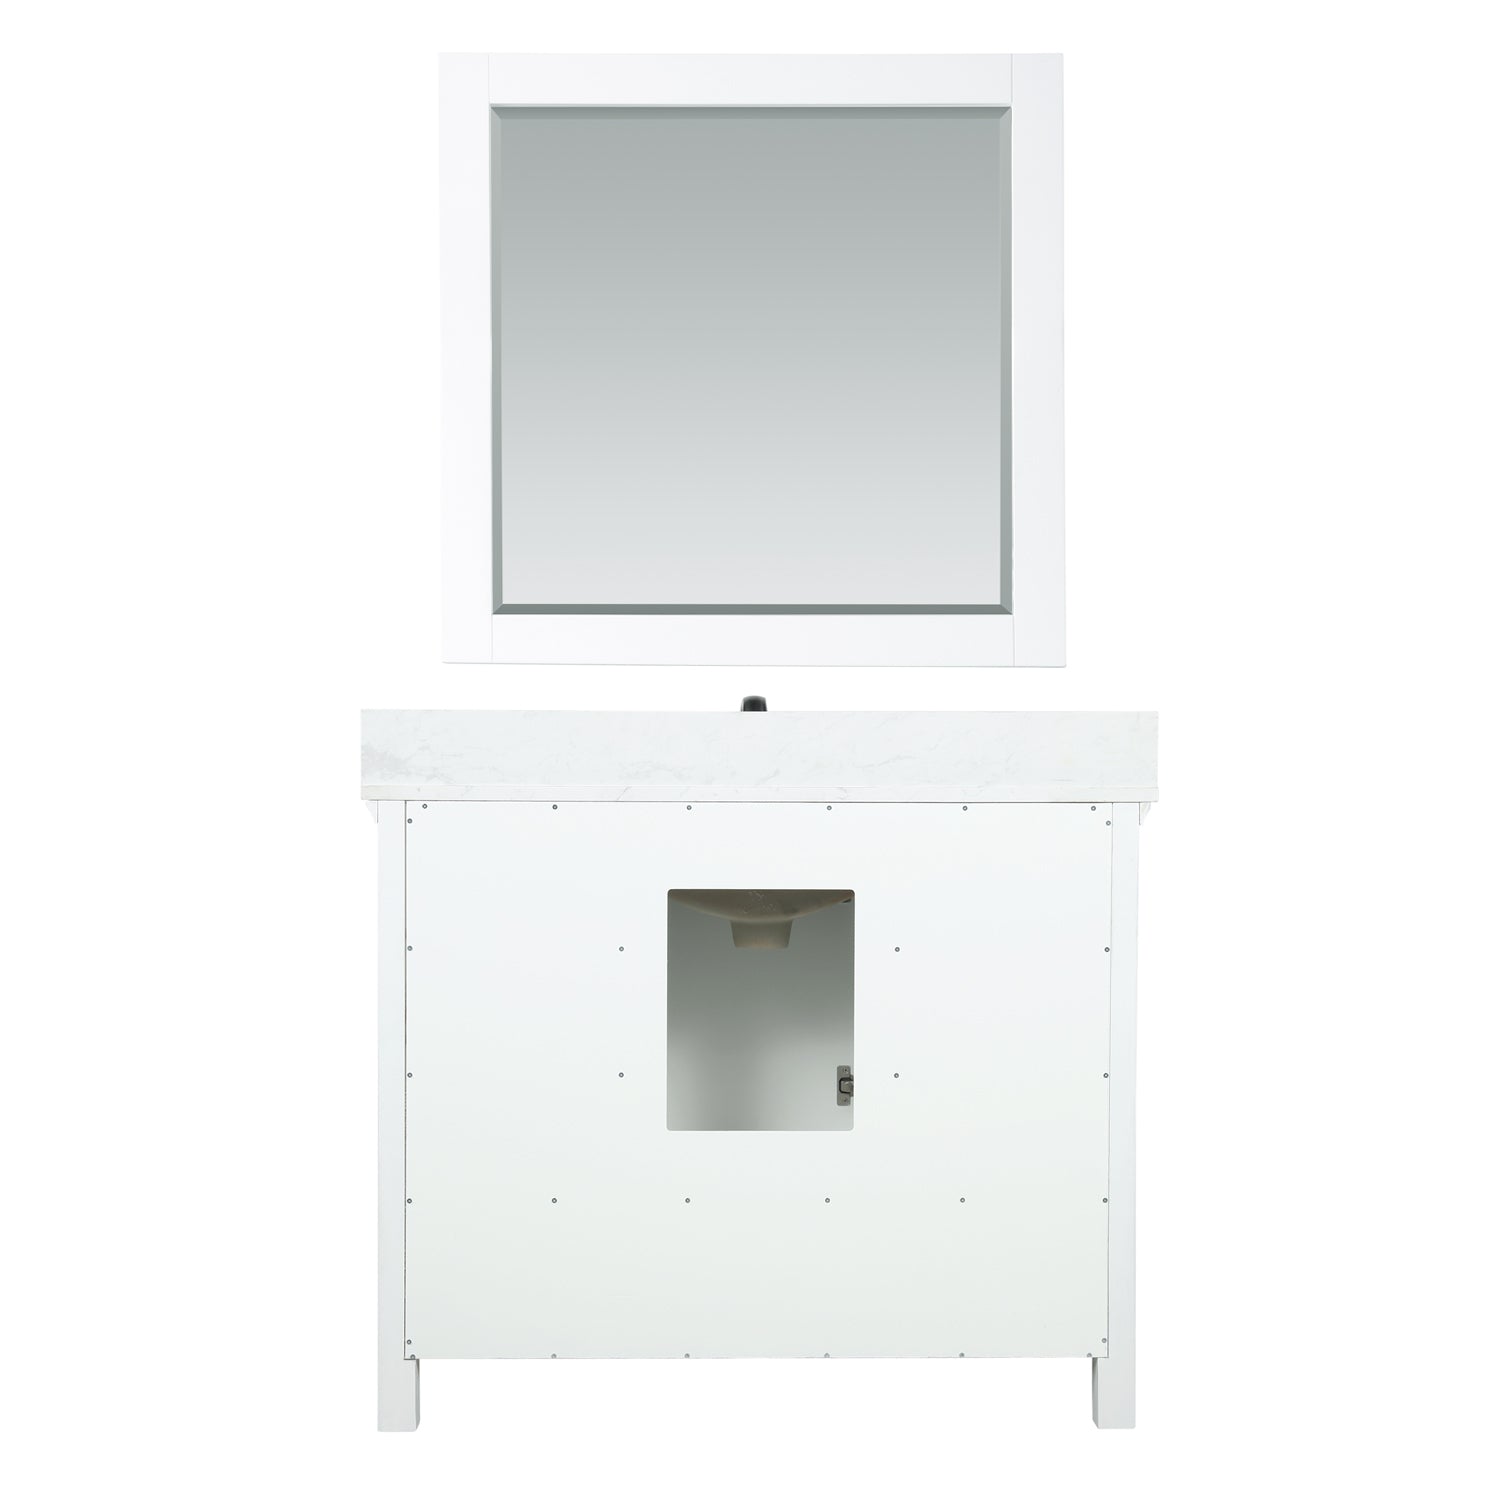 Altair Isla 42" Single Bathroom Vanity Set in White and Carrara White Marble Countertop with Mirror 538042-WH-AW - Molaix696952511338Vanity538042-WH-AW